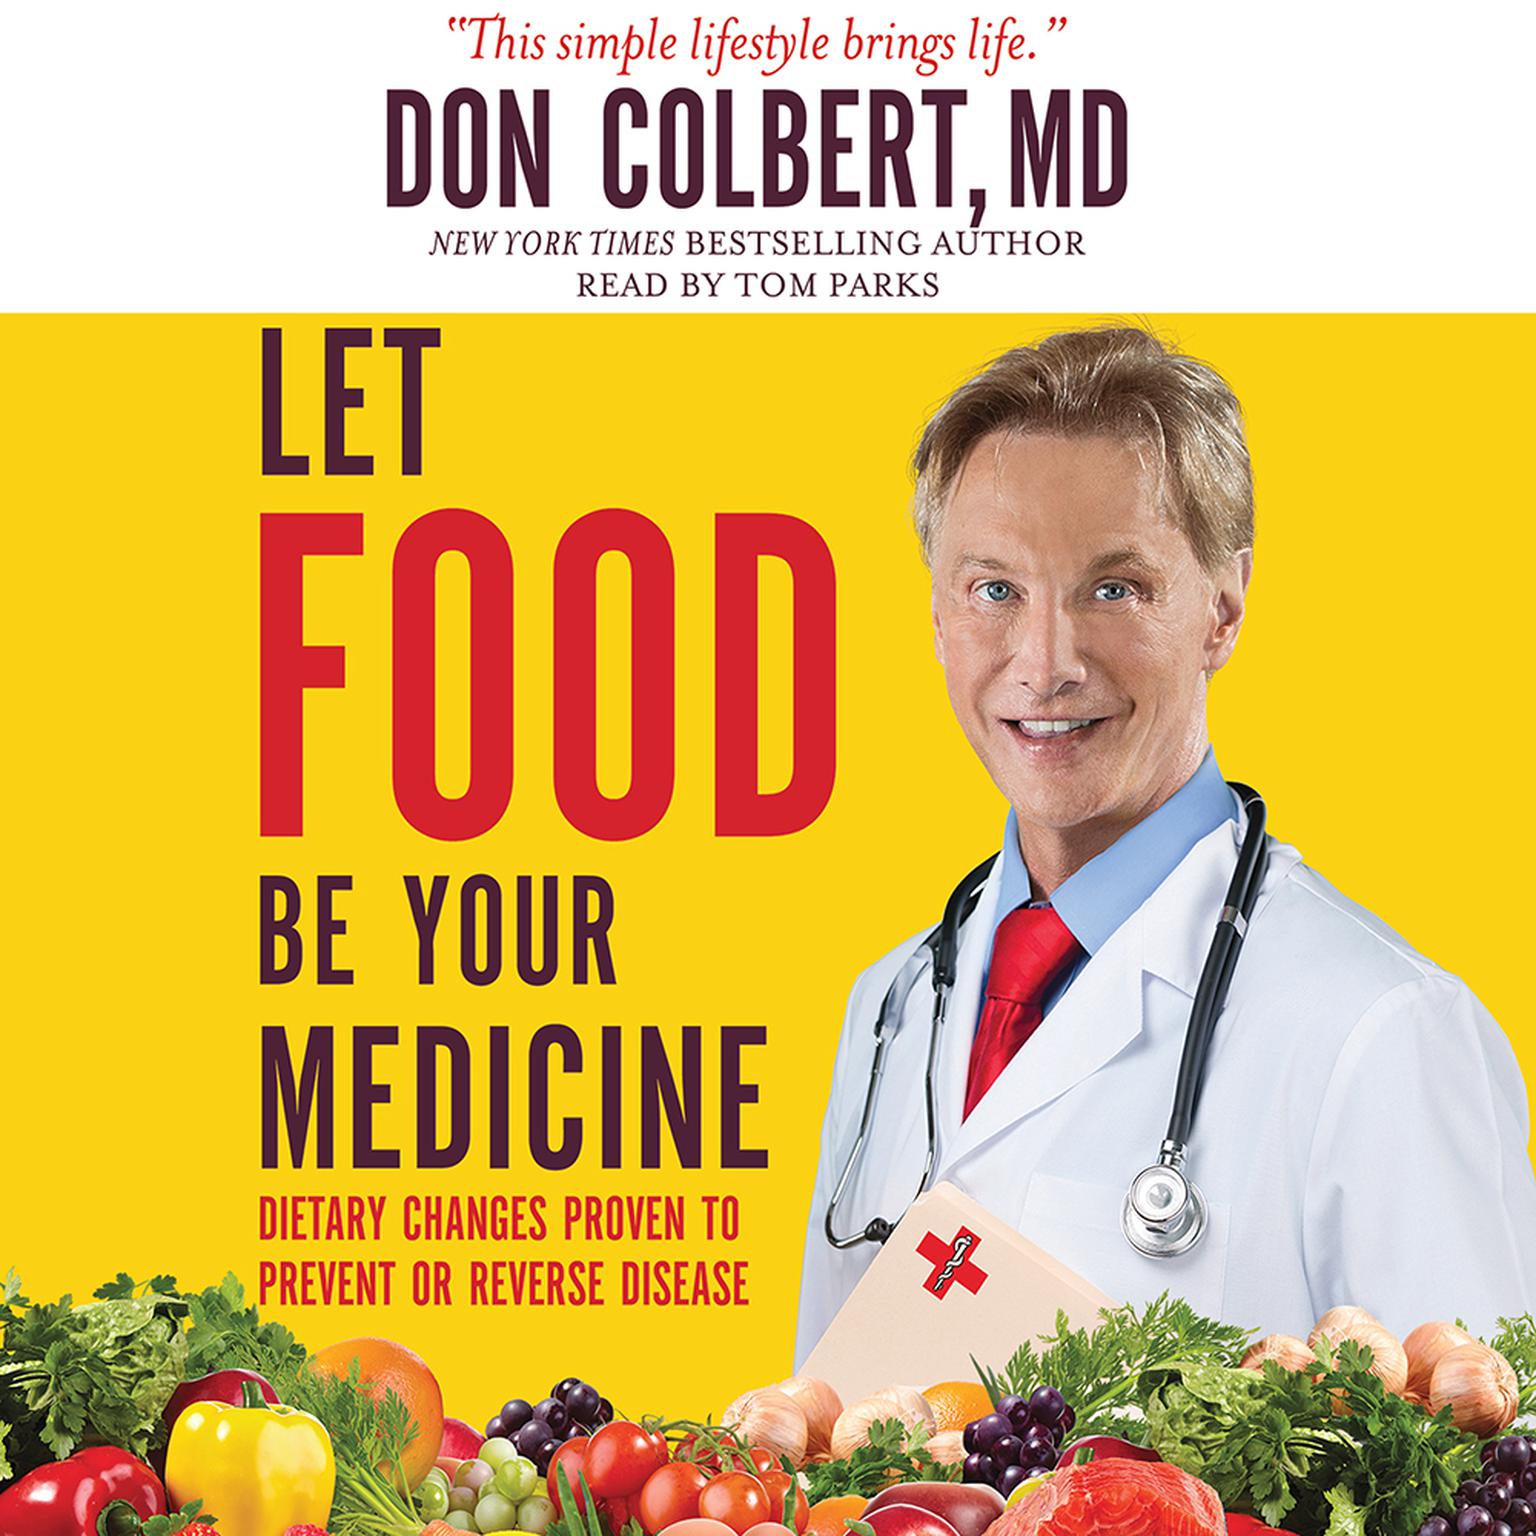 Let Food Be Your Medicine: Dietary Changes Proven to Prevent and Reverse Disease Audiobook, by Don Colbert